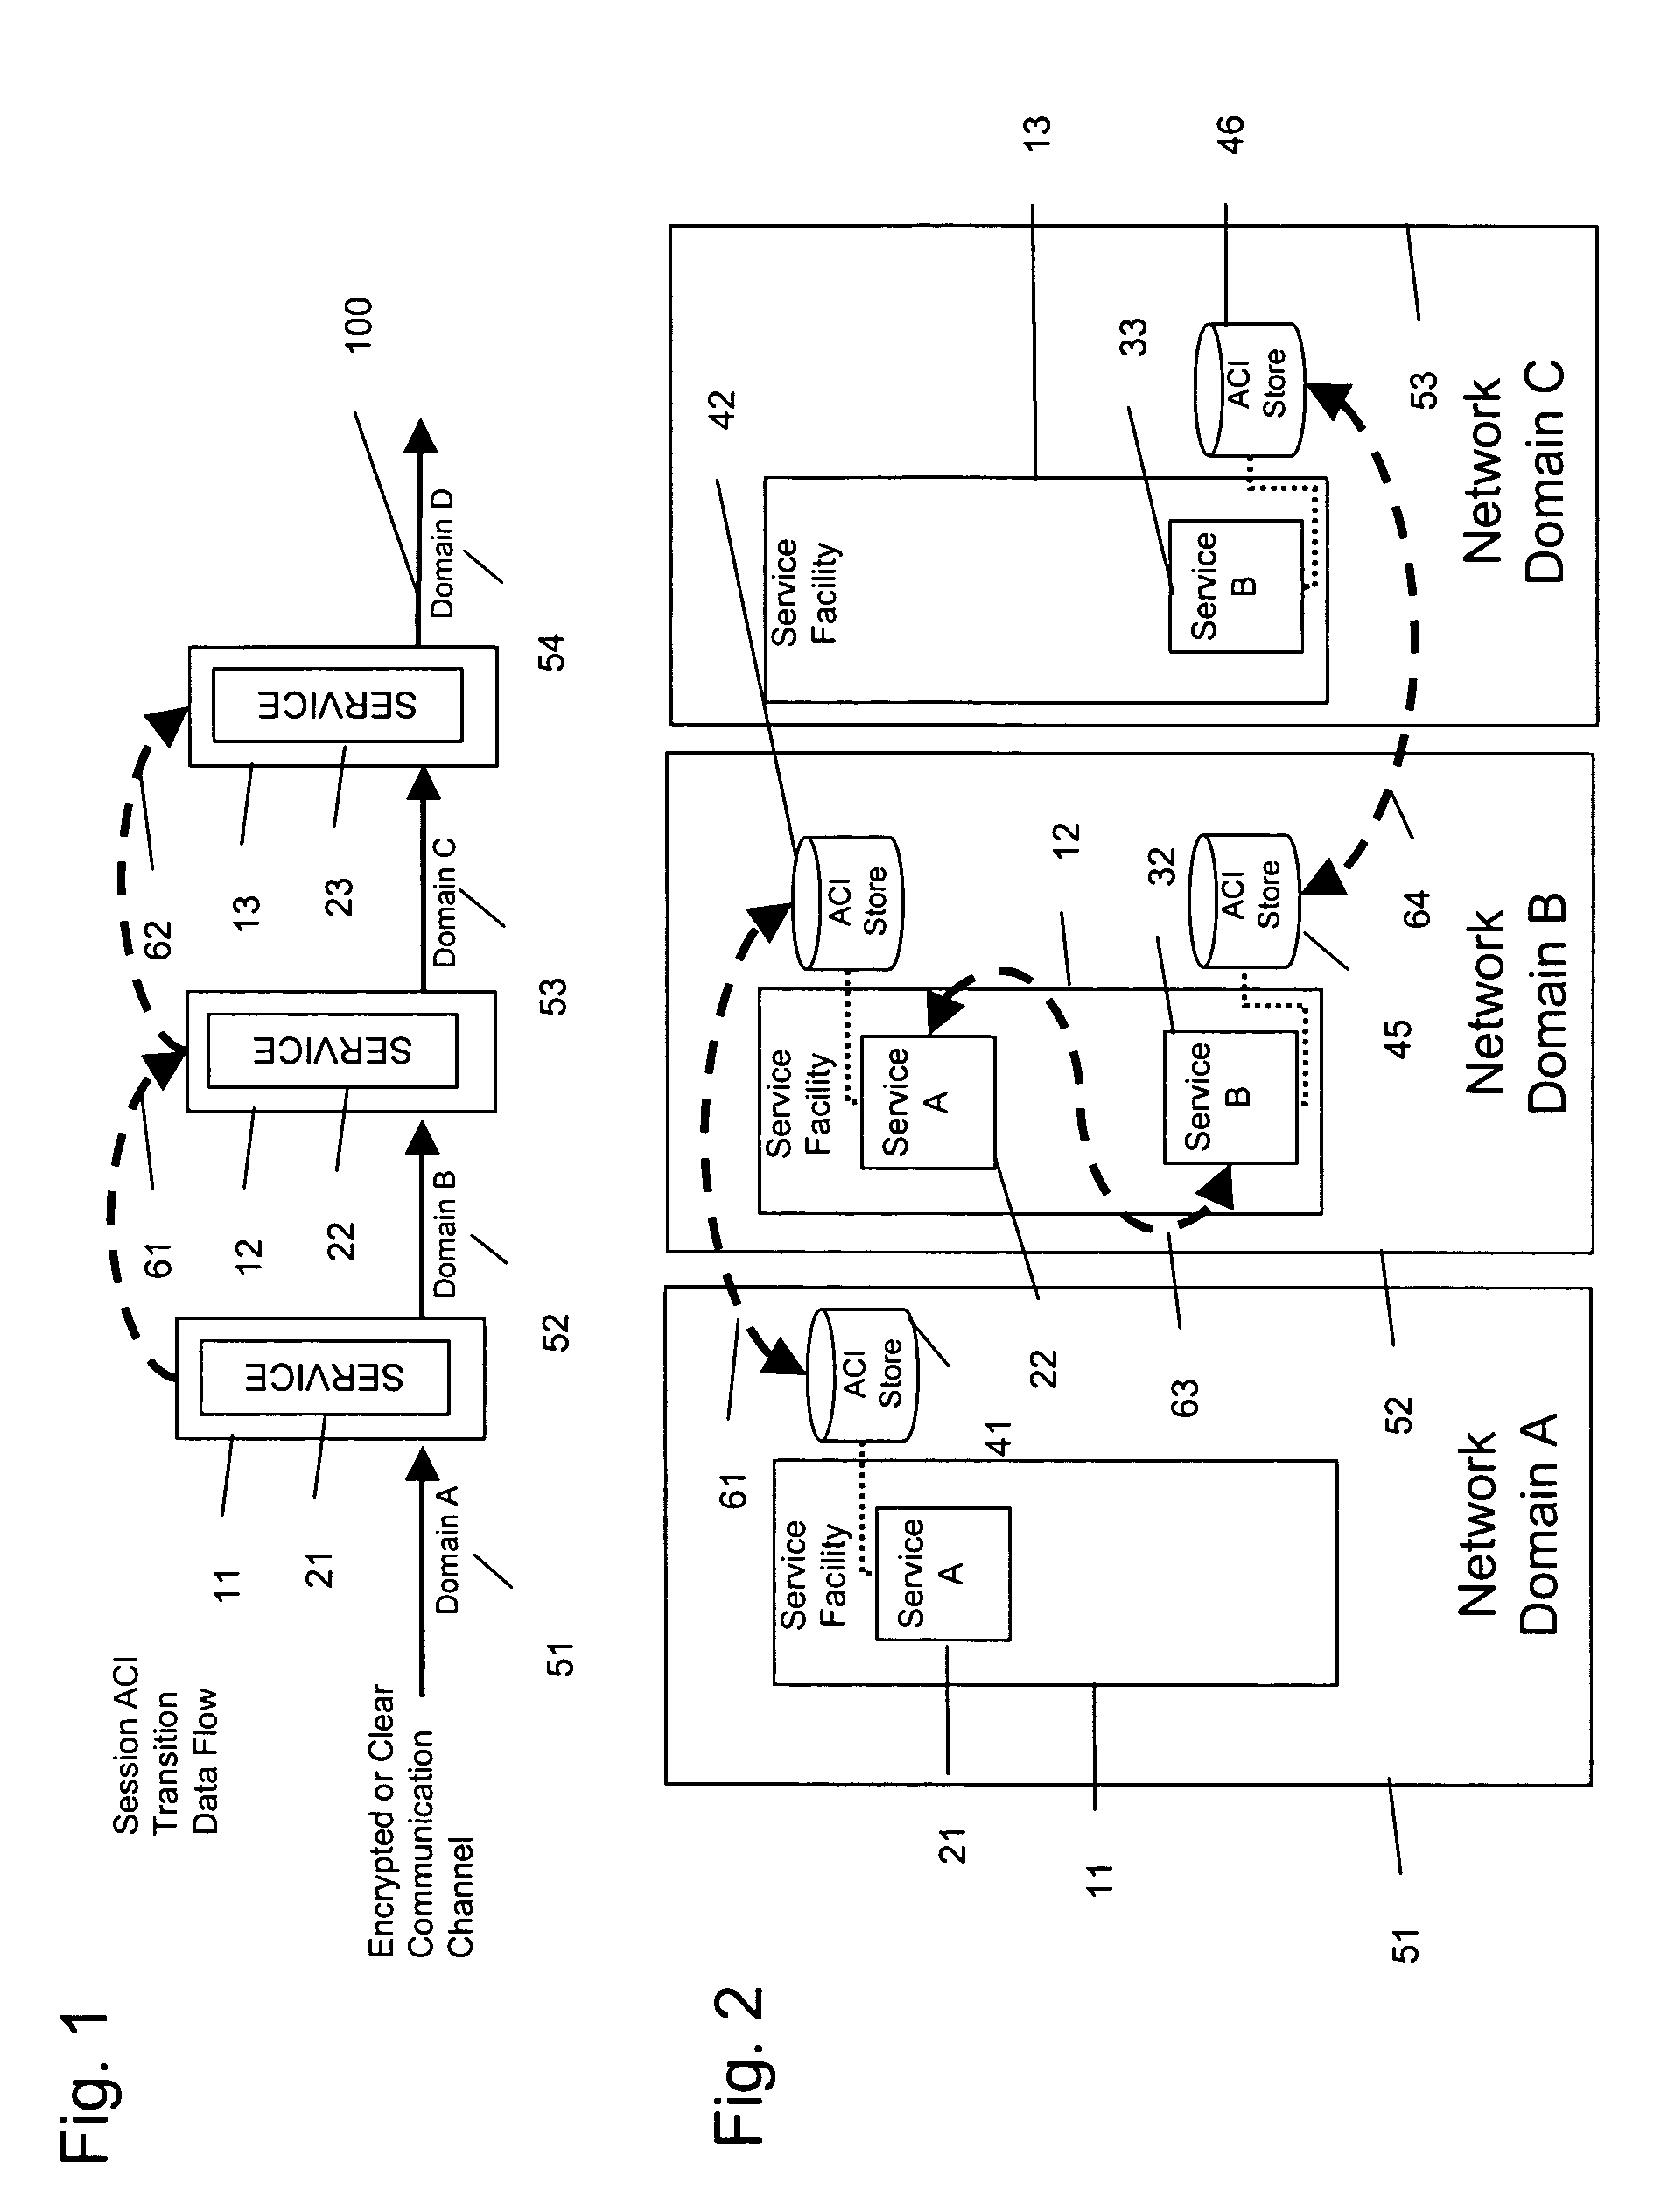 System and method for traversing metadata across multiple network domains at various layers of the protocol stack